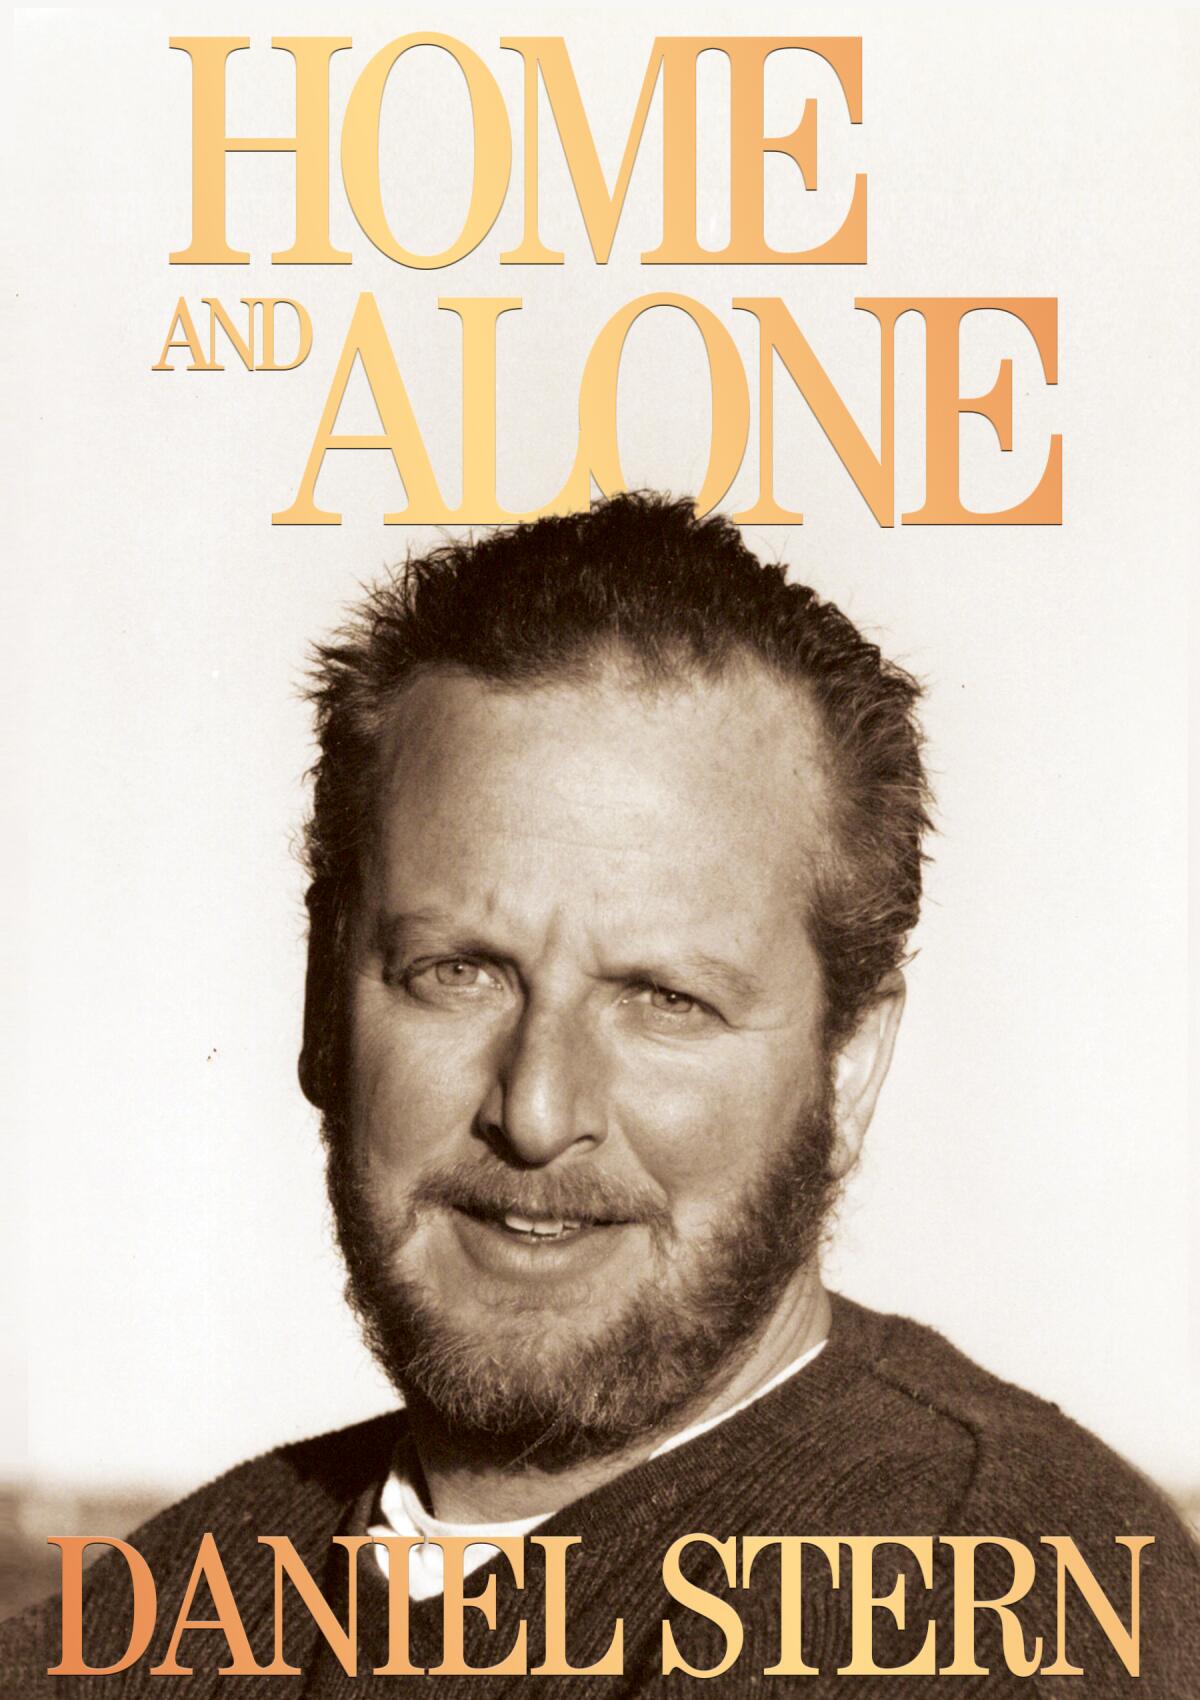 "Home and Alone" by Daniel Stern